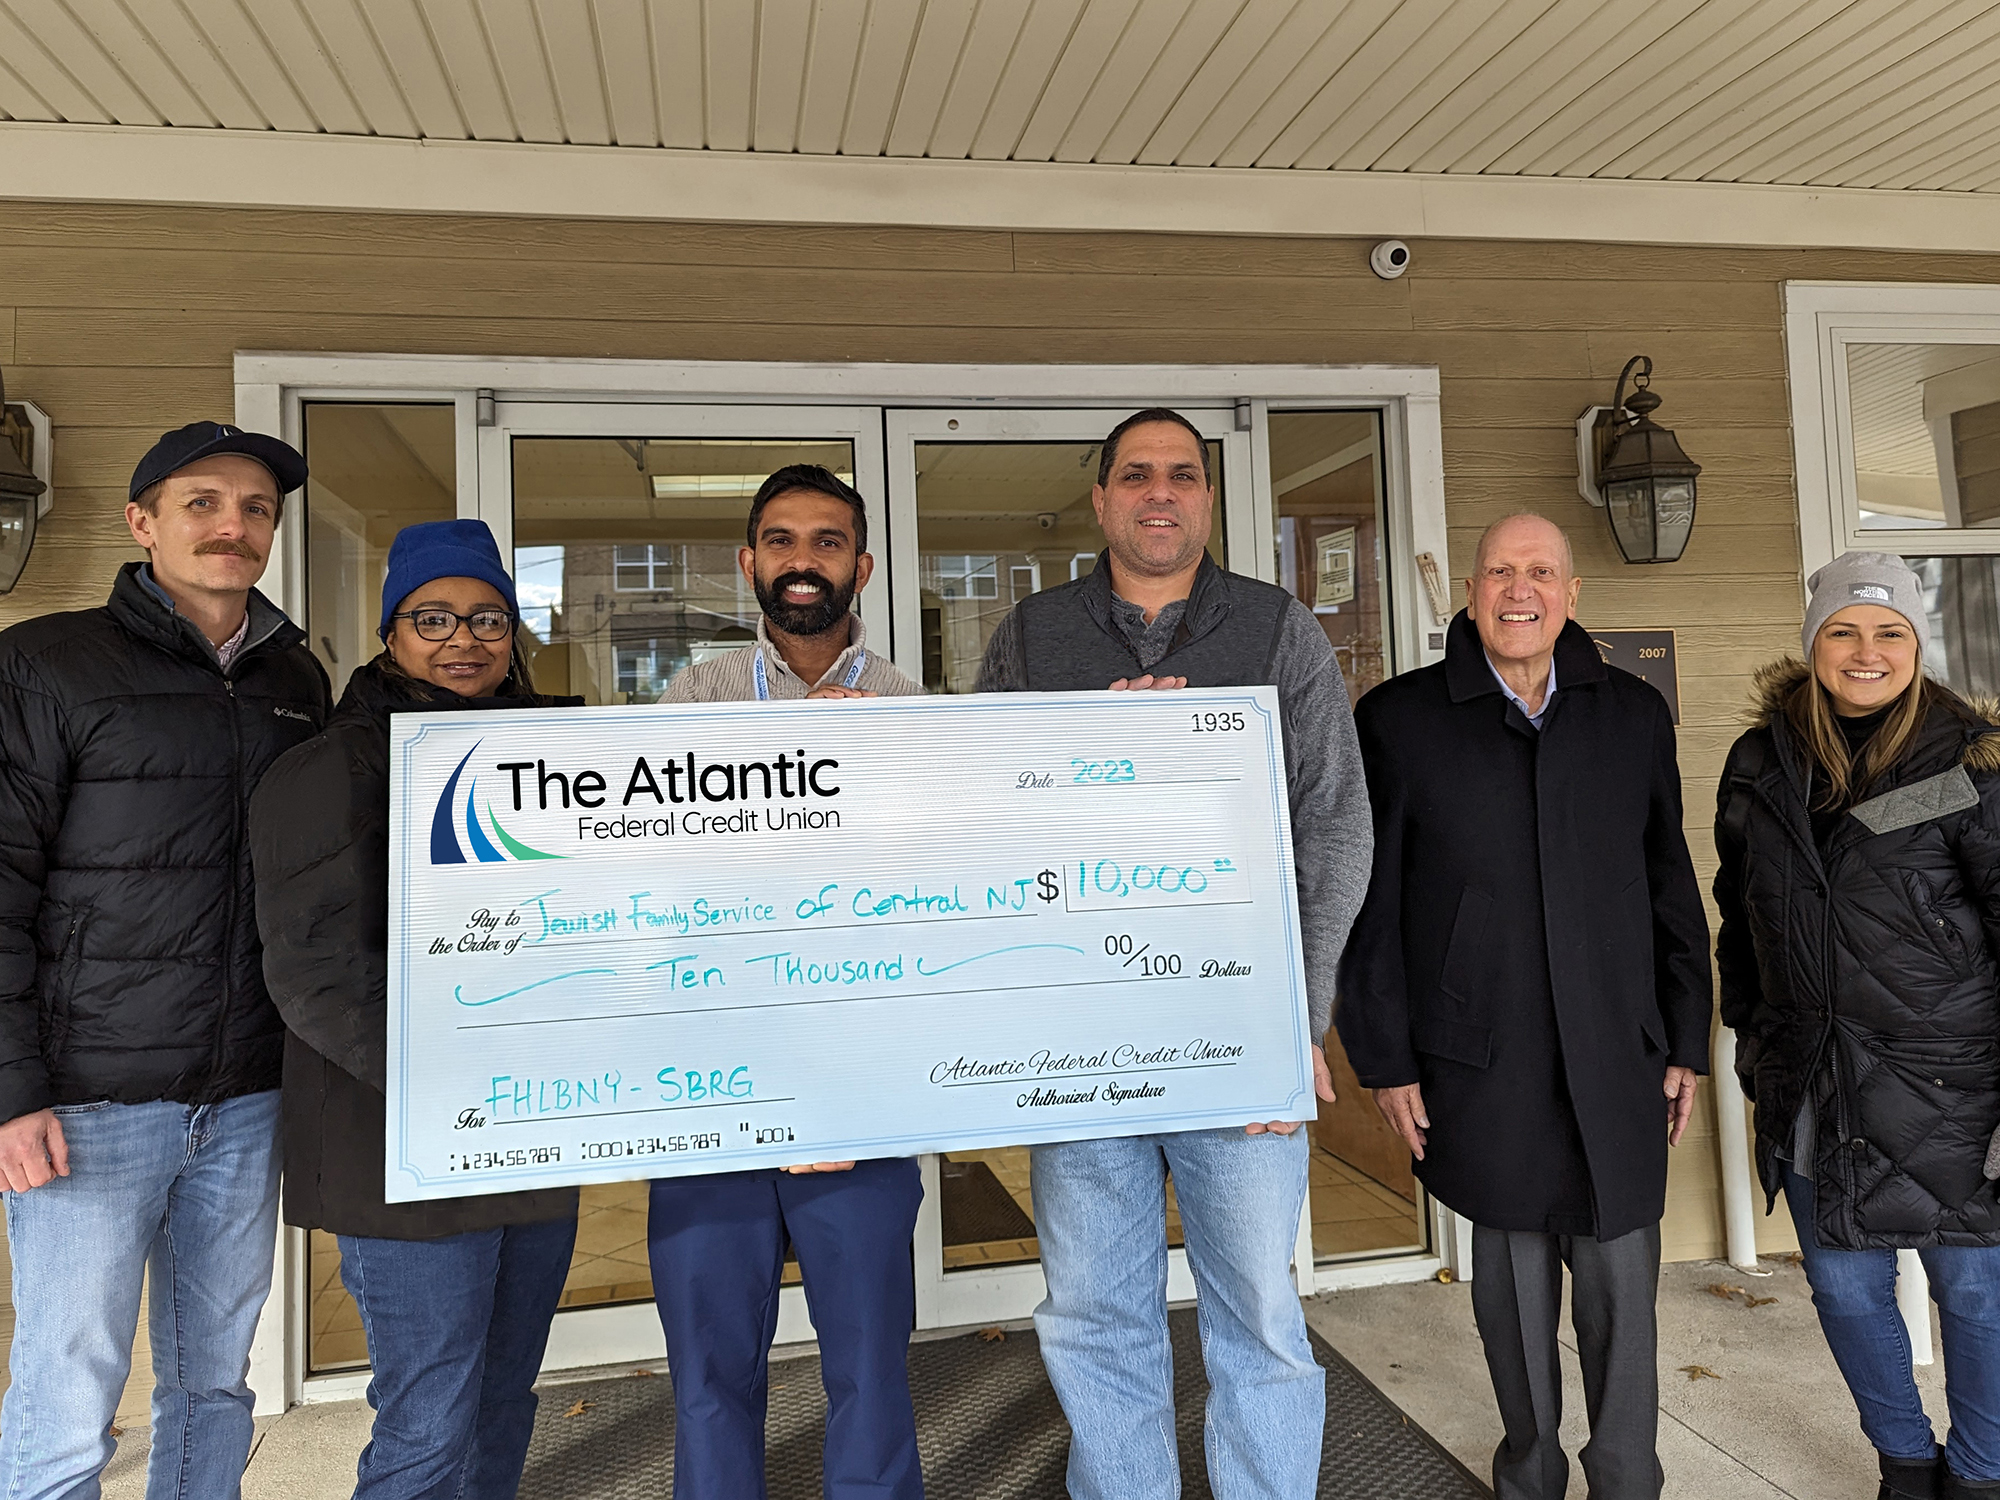 Photo of representatives from Jewish Family Service of Central NJ accepting an oversized check of $10,000 through the FHLBNY SBRG from representatives of The Atlantic